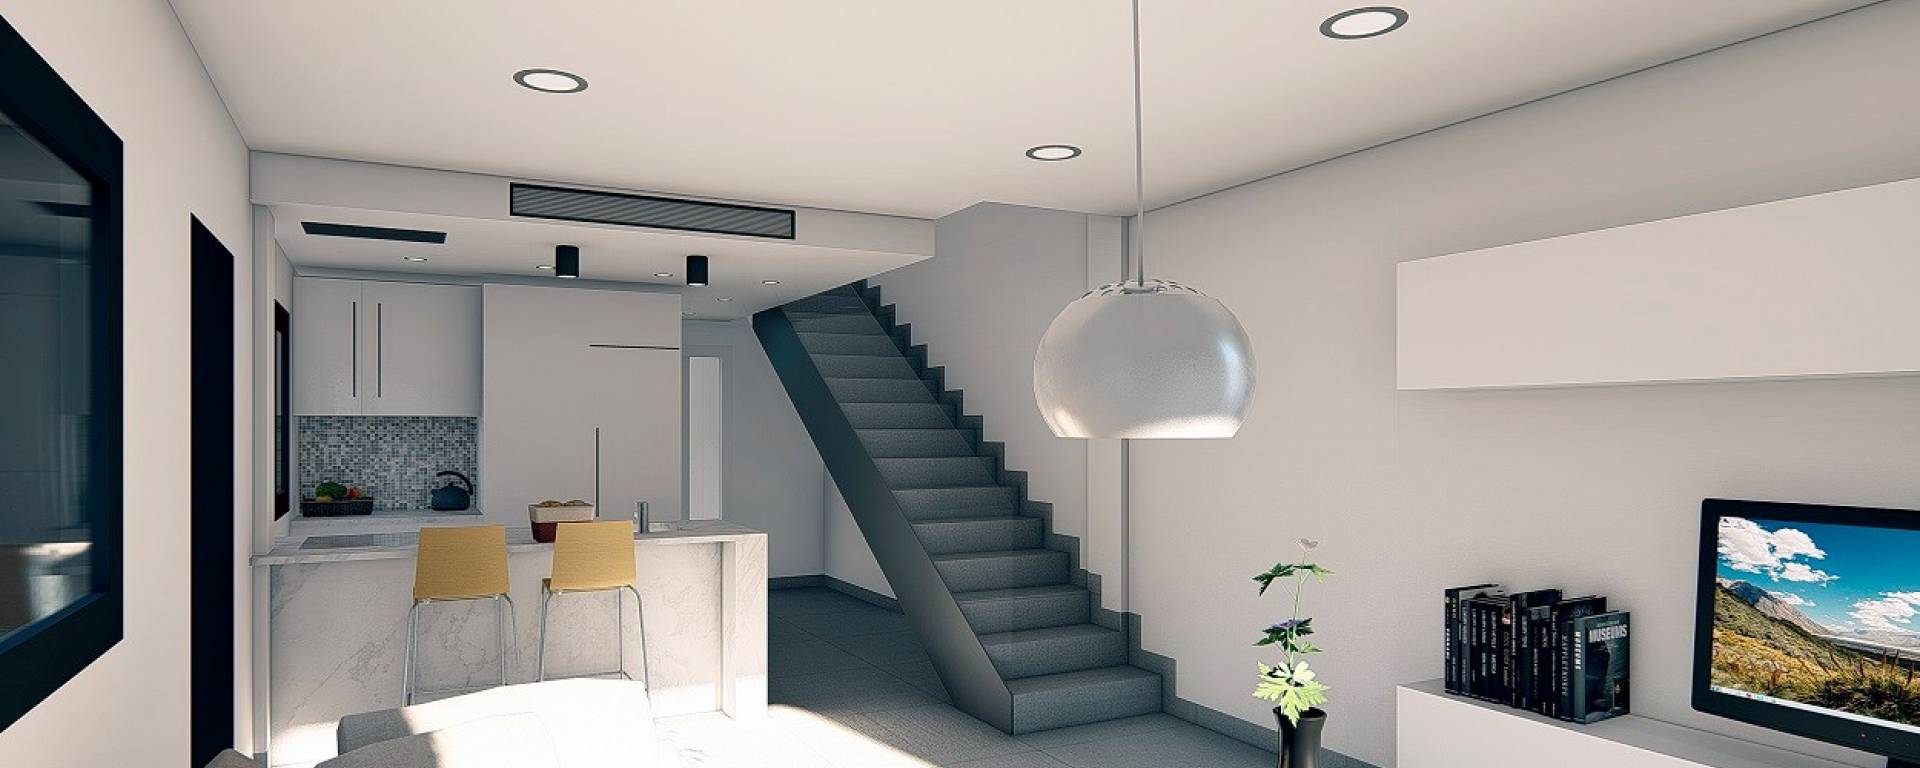 Kitchen with stairs to the second floor